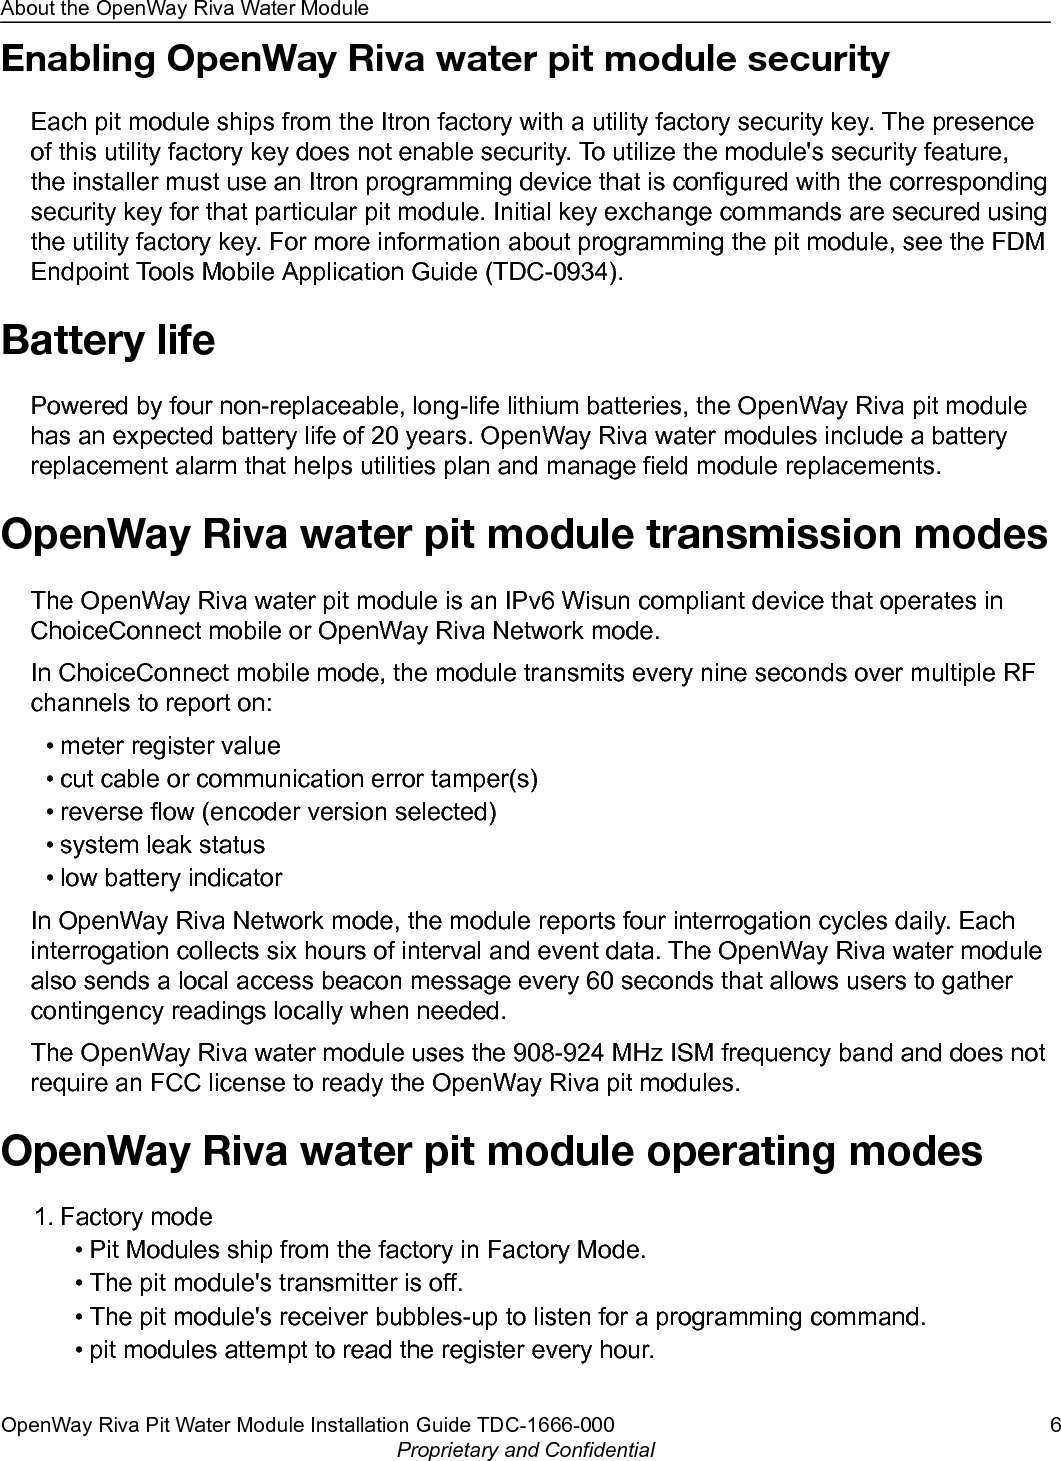 Enabling OpenWay Riva water pit module securityEach pit module ships from the Itron factory with a utility factory security key. The presenceof this utility factory key does not enable security. To utilize the module&apos;s security feature,the installer must use an Itron programming device that is configured with the correspondingsecurity key for that particular pit module. Initial key exchange commands are secured usingthe utility factory key. For more information about programming the pit module, see the FDMEndpoint Tools Mobile Application Guide (TDC-0934).Battery lifePowered by four non-replaceable, long-life lithium batteries, the OpenWay Riva pit modulehas an expected battery life of 20 years. OpenWay Riva water modules include a batteryreplacement alarm that helps utilities plan and manage field module replacements.OpenWay Riva water pit module transmission modesThe OpenWay Riva water pit module is an IPv6 Wisun compliant device that operates inChoiceConnect mobile or OpenWay Riva Network mode.In ChoiceConnect mobile mode, the module transmits every nine seconds over multiple RFchannels to report on:• meter register value• cut cable or communication error tamper(s)• reverse flow (encoder version selected)• system leak status• low battery indicatorIn OpenWay Riva Network mode, the module reports four interrogation cycles daily. Eachinterrogation collects six hours of interval and event data. The OpenWay Riva water modulealso sends a local access beacon message every 60 seconds that allows users to gathercontingency readings locally when needed.The OpenWay Riva water module uses the 908-924 MHz ISM frequency band and does notrequire an FCC license to ready the OpenWay Riva pit modules.OpenWay Riva water pit module operating modes1. Factory mode• Pit Modules ship from the factory in Factory Mode.• The pit module&apos;s transmitter is off.• The pit module&apos;s receiver bubbles-up to listen for a programming command.• pit modules attempt to read the register every hour.About the OpenWay Riva Water ModuleOpenWay Riva Pit Water Module Installation Guide TDC-1666-000 6Proprietary and Confidential